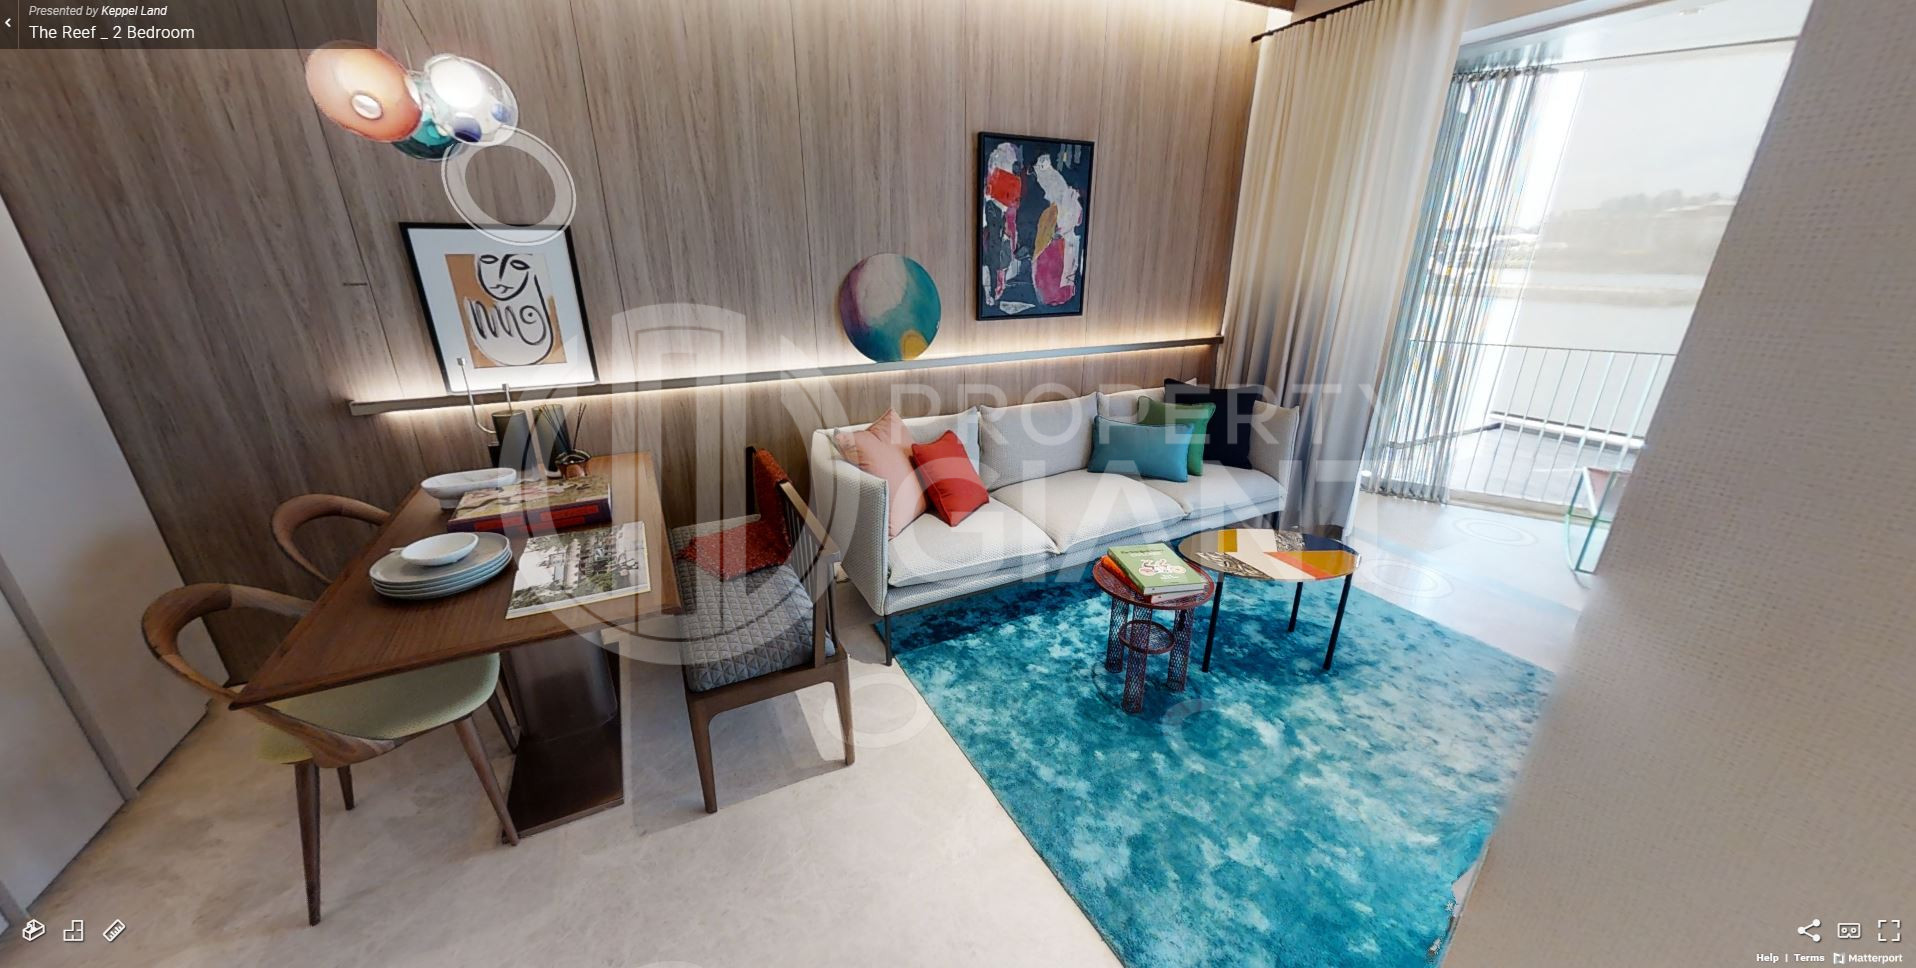 3D Virtual Tour of The Reef at King's Dock 2 Bedroom